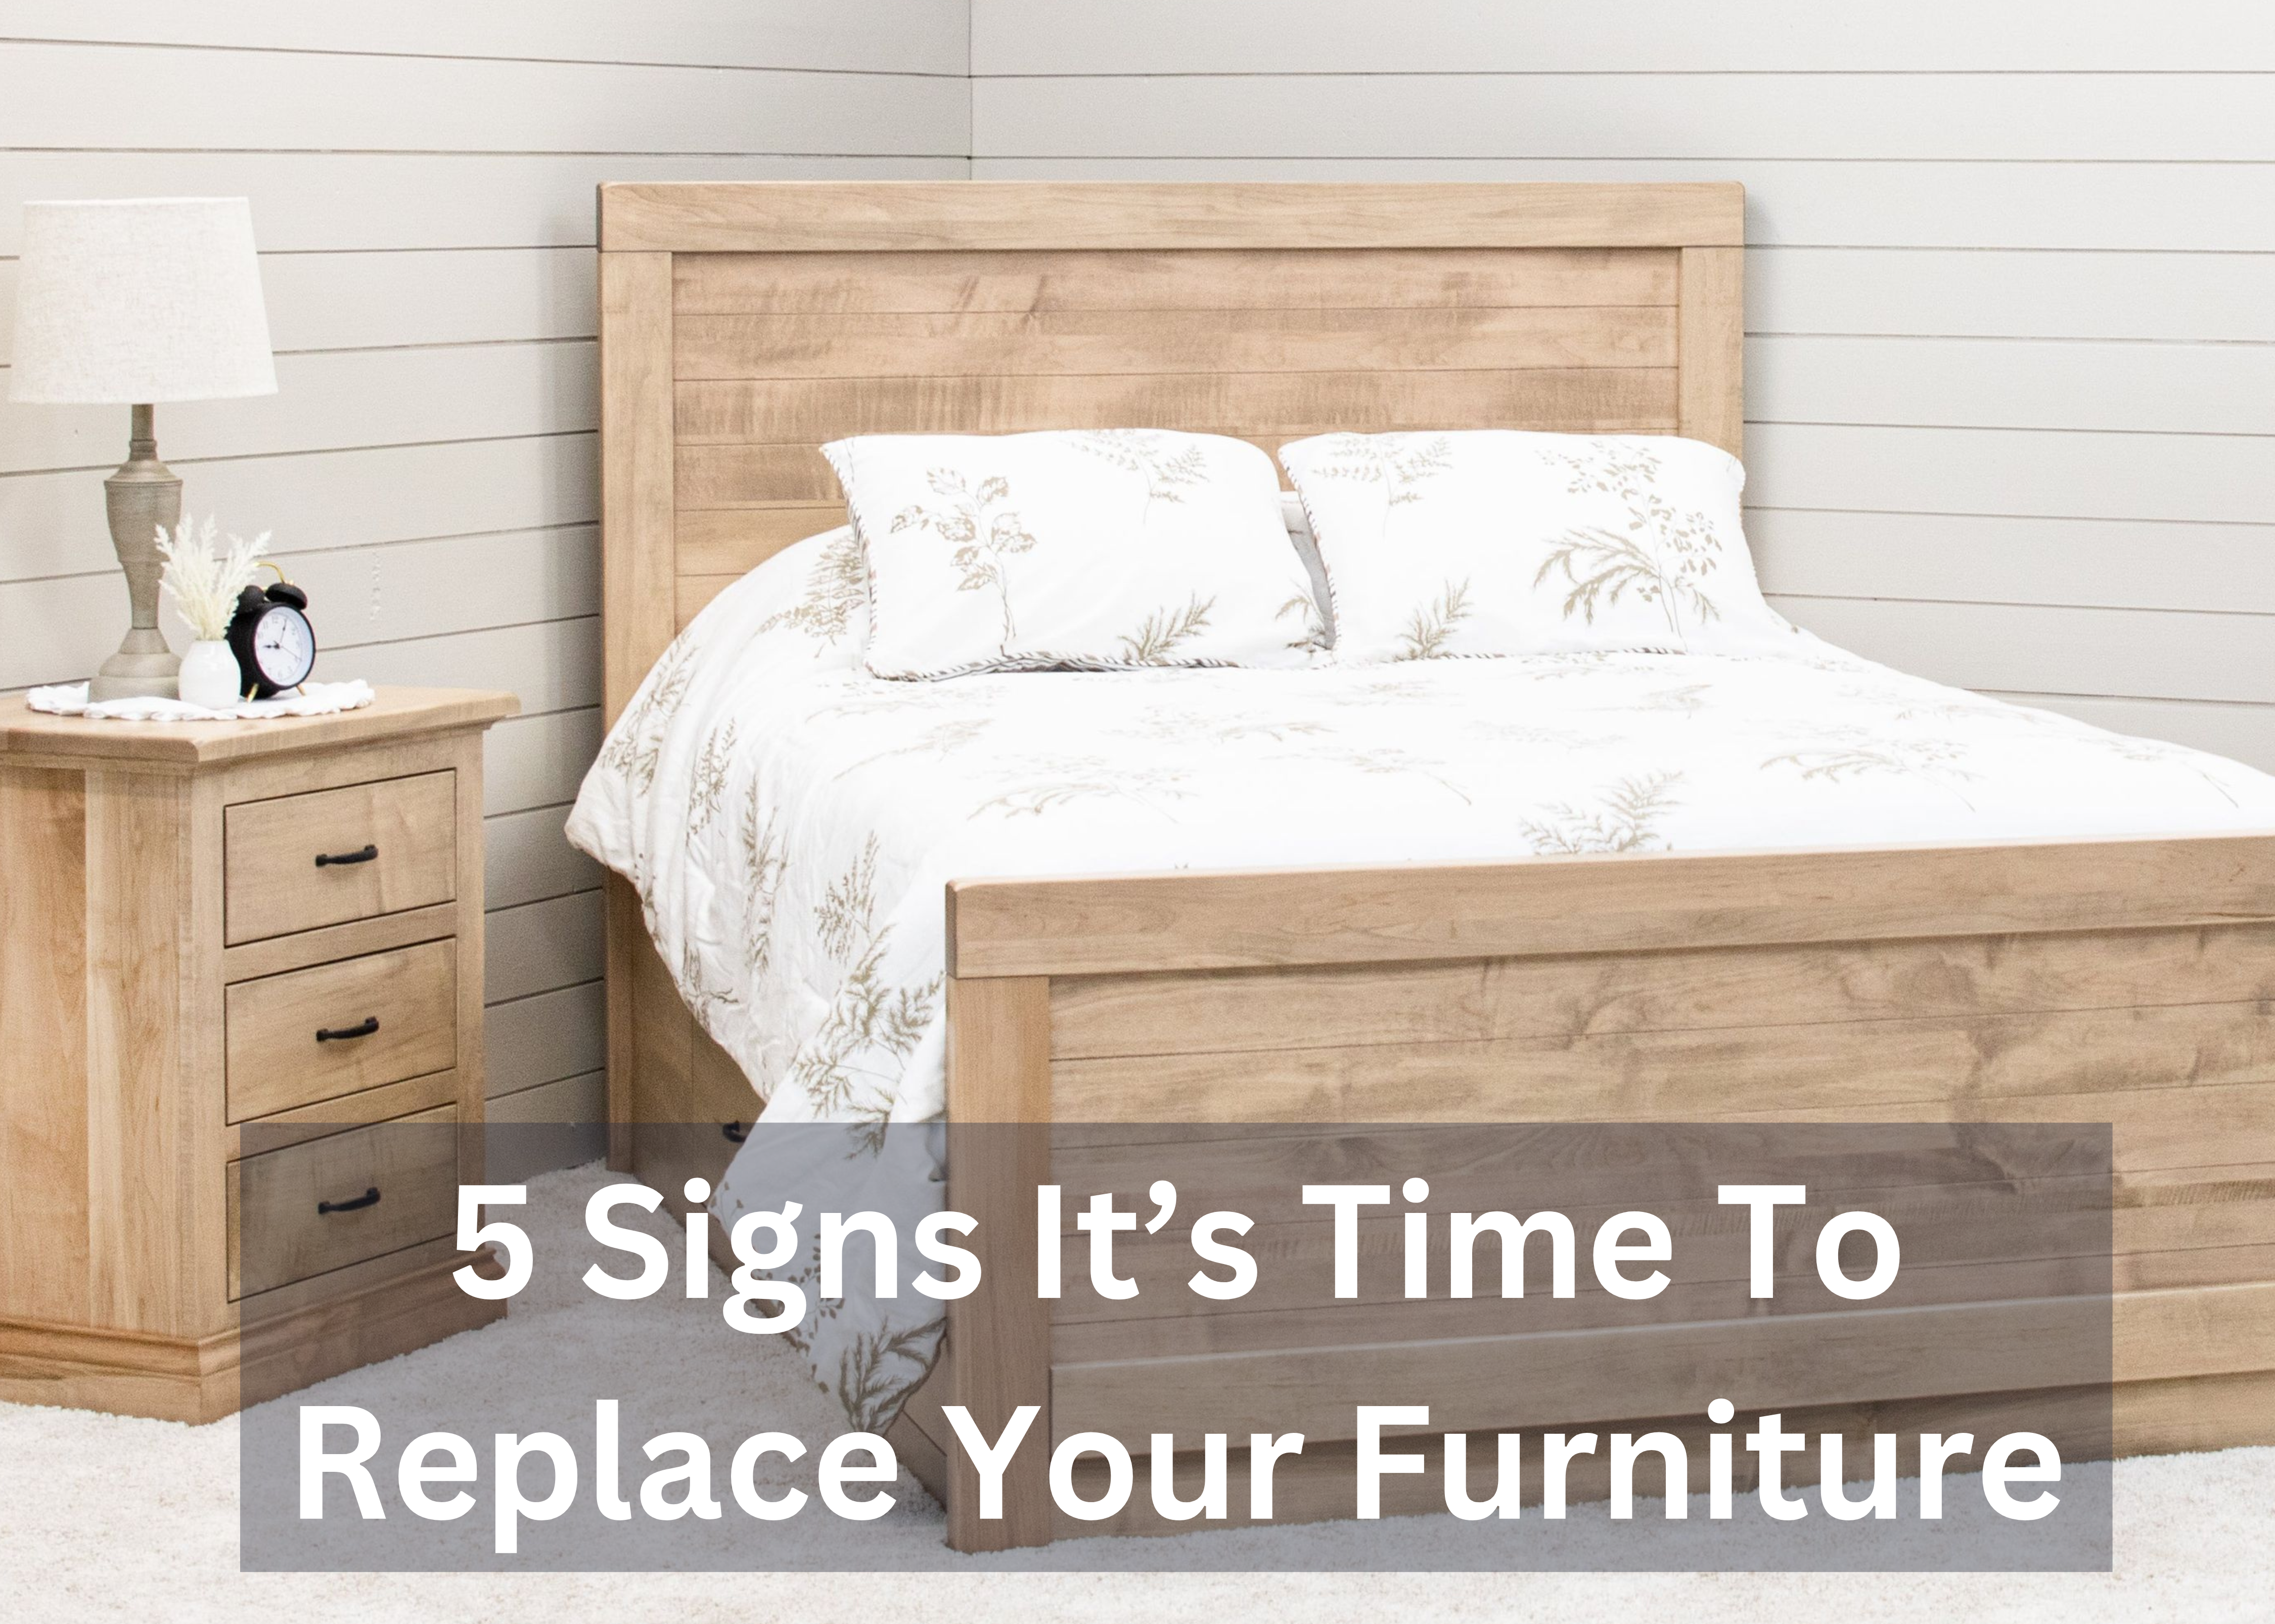 5 Signs It's Time to Replace Your Furniture